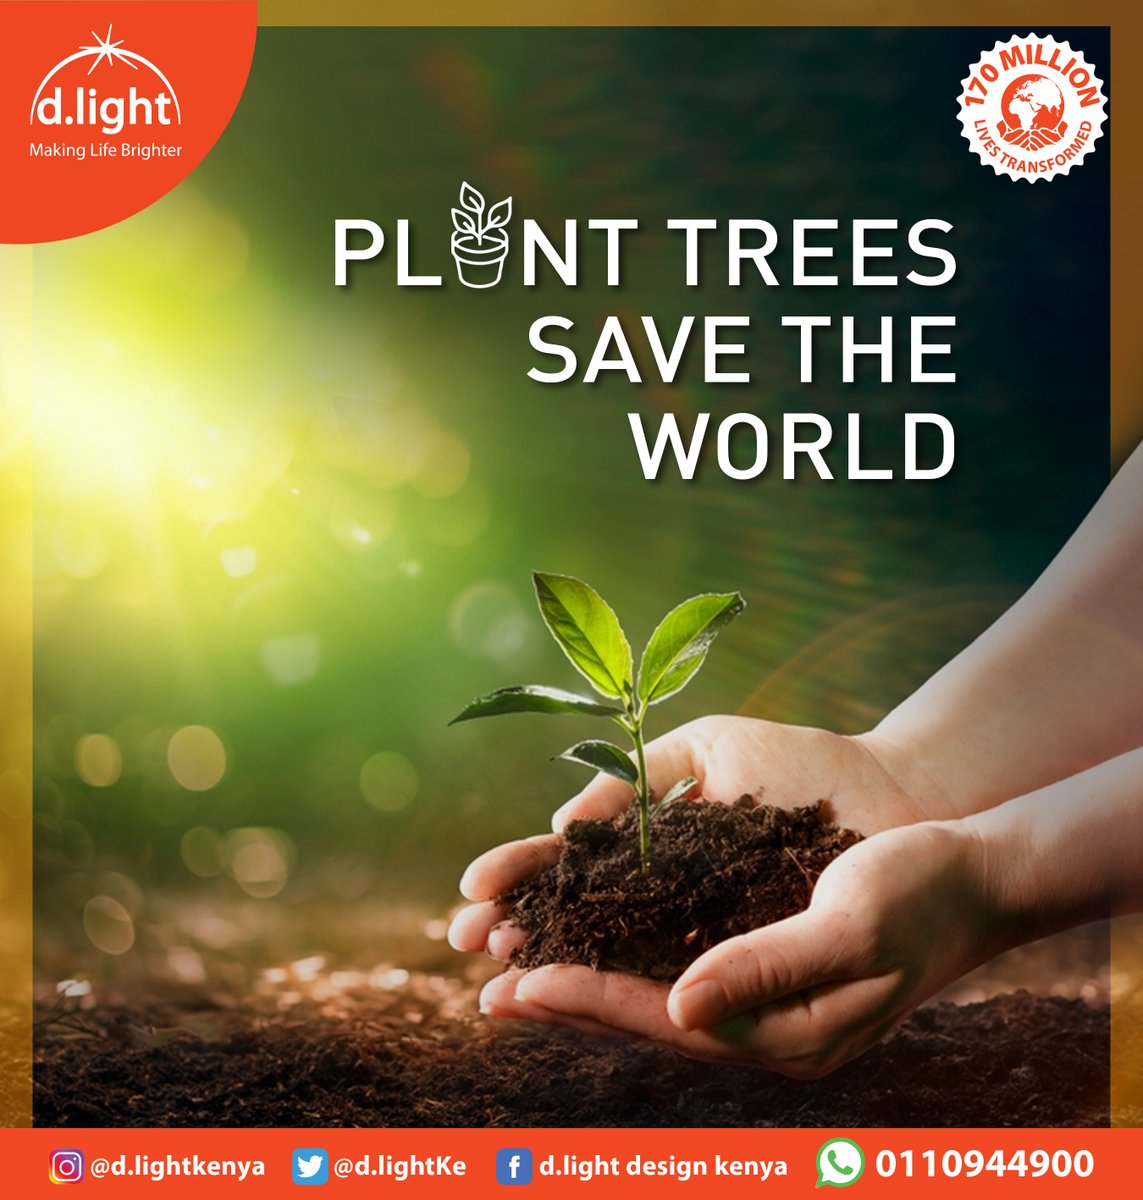 Join us as we honor Tree Planting Day and pay tribute to flood victims. Let's create a greener, more sustainable future together. 🌱🌍 #GreenInitiative #TreePlanting #FloodVictims #dlight